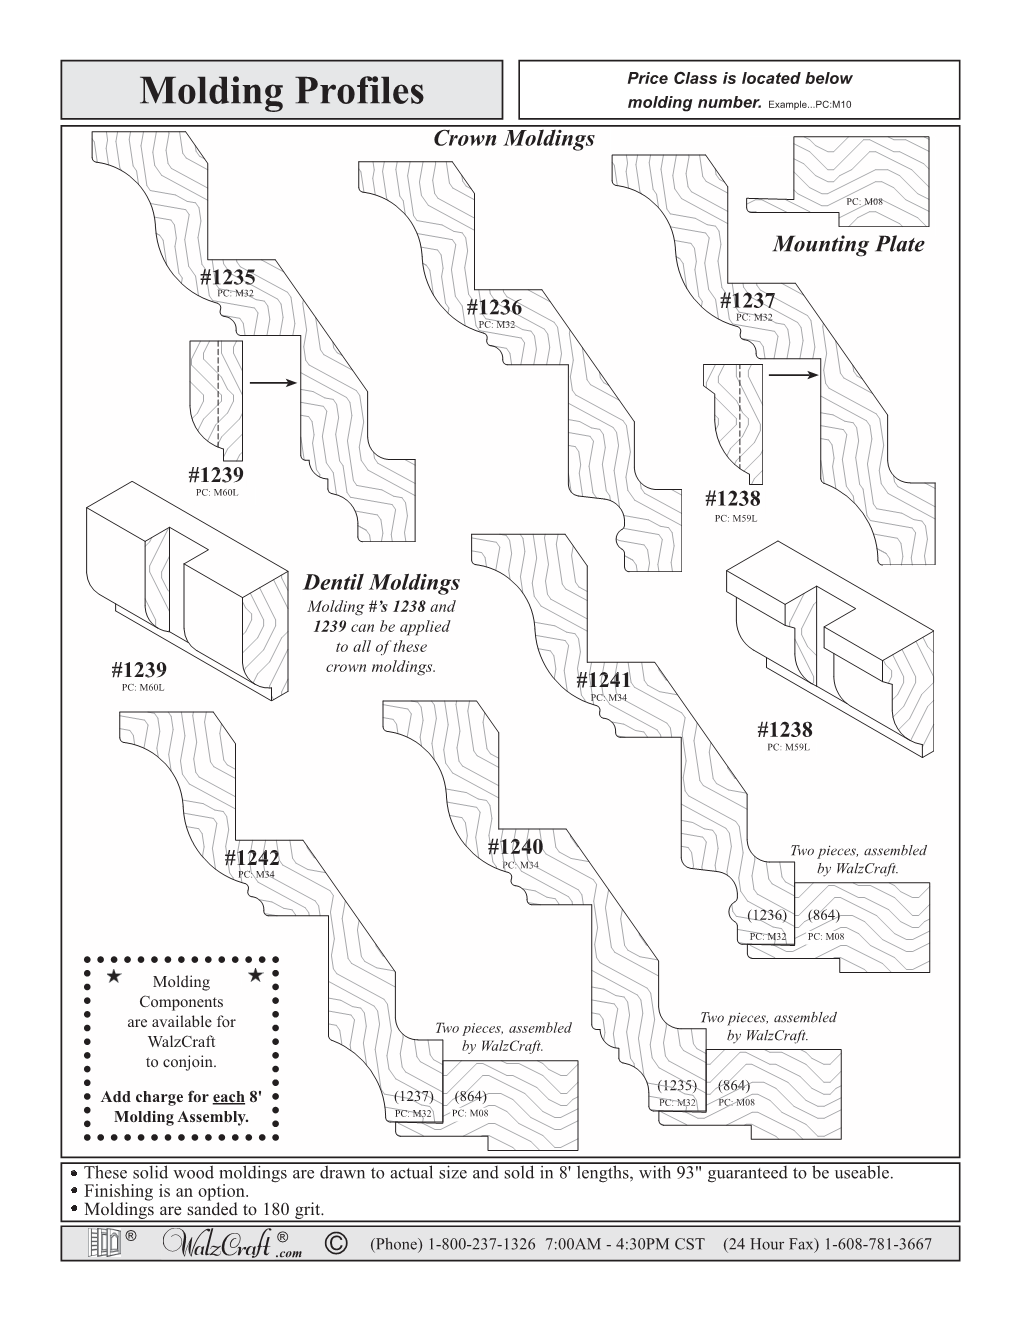 Molding Profiles Molding Number